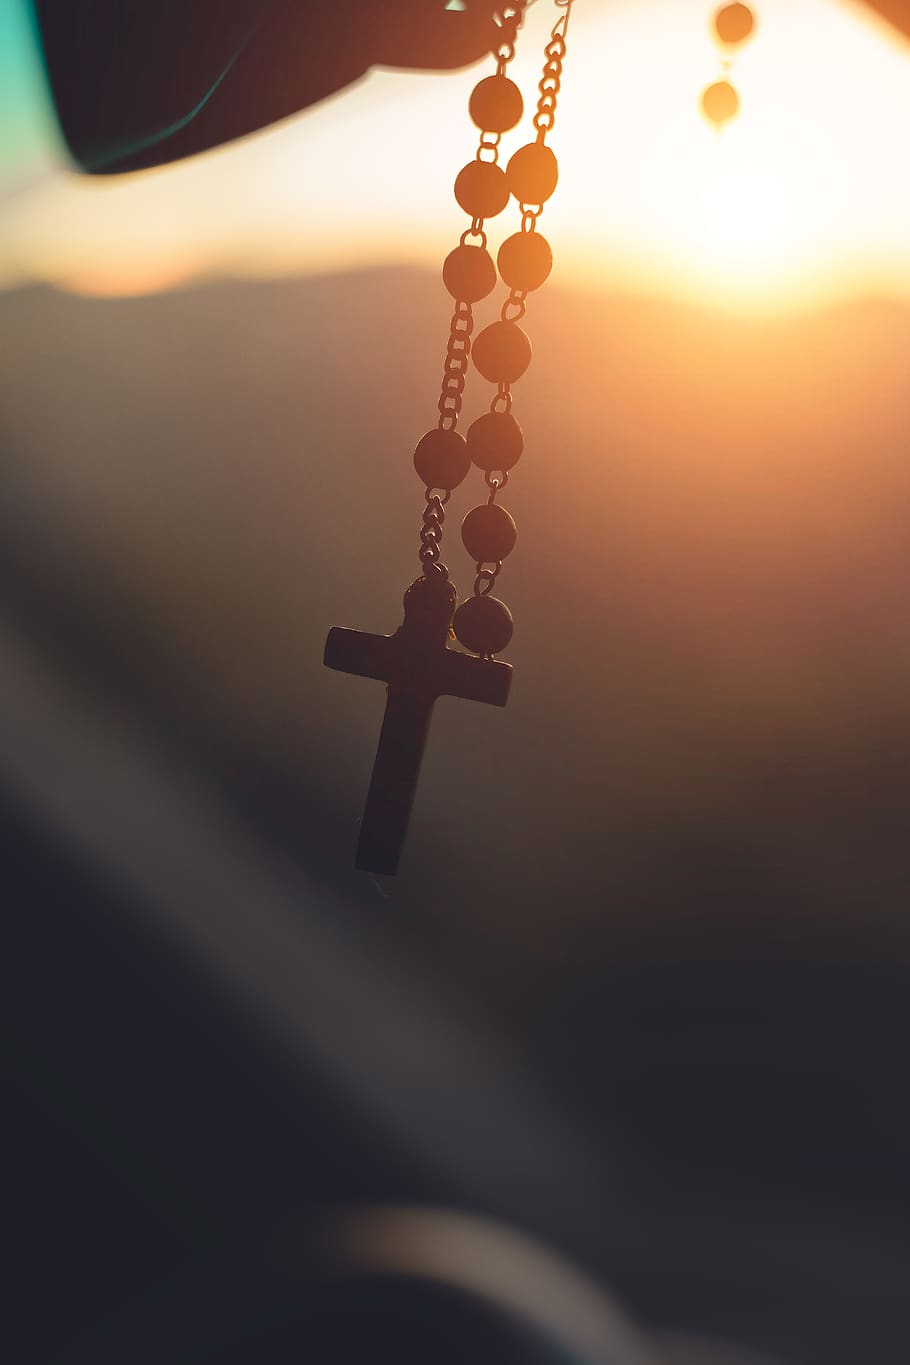 Black Aesthetic, crucifix, low angle view, crucifixion, nature Free HD Wallpaper